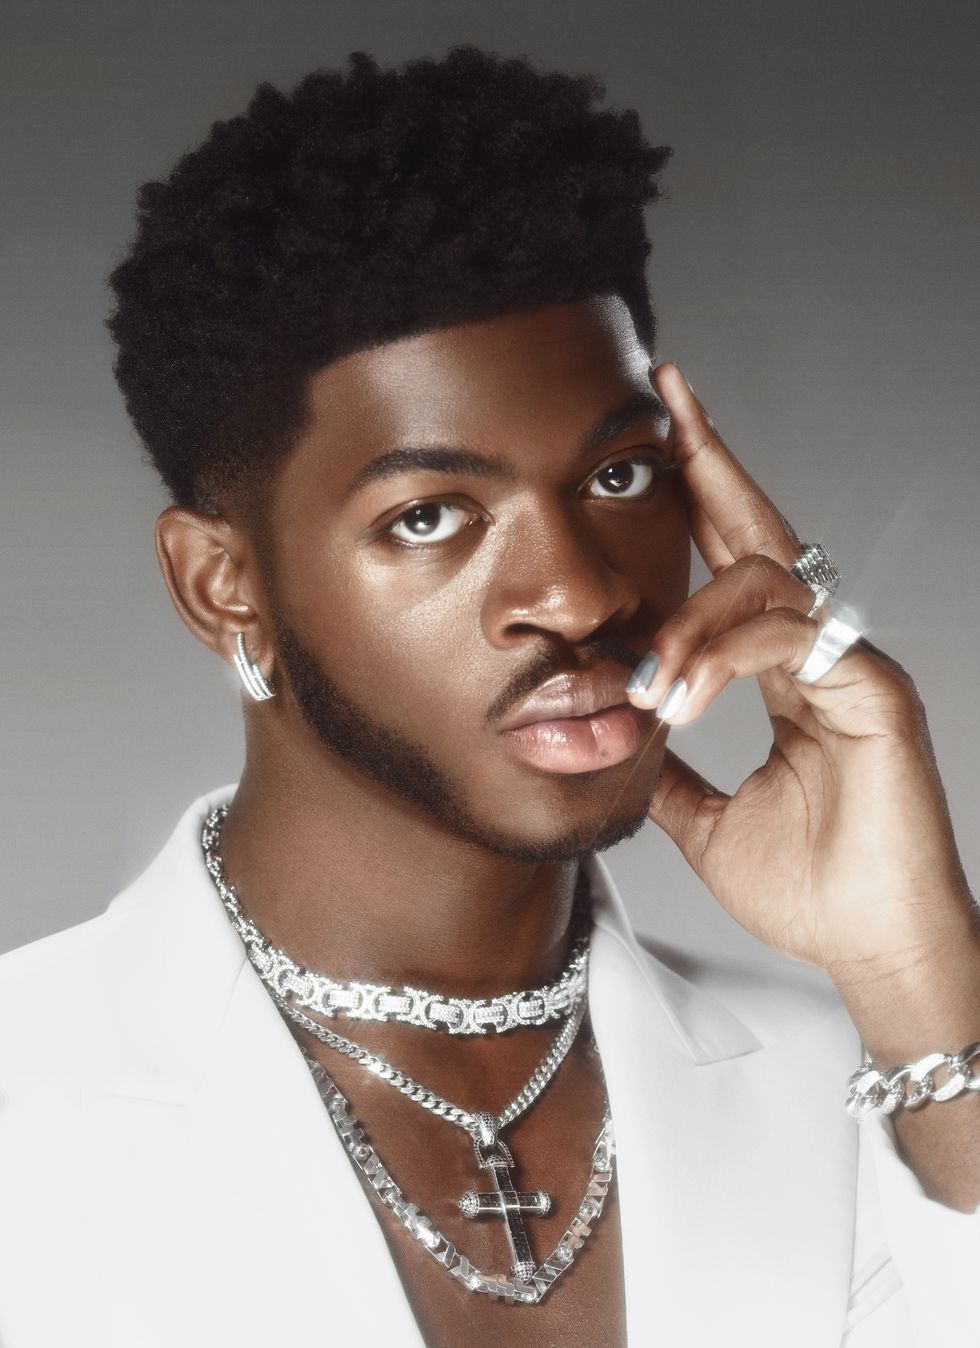 Lil Nas X Is the Music Director for Harper's BAZAAR's September Issue